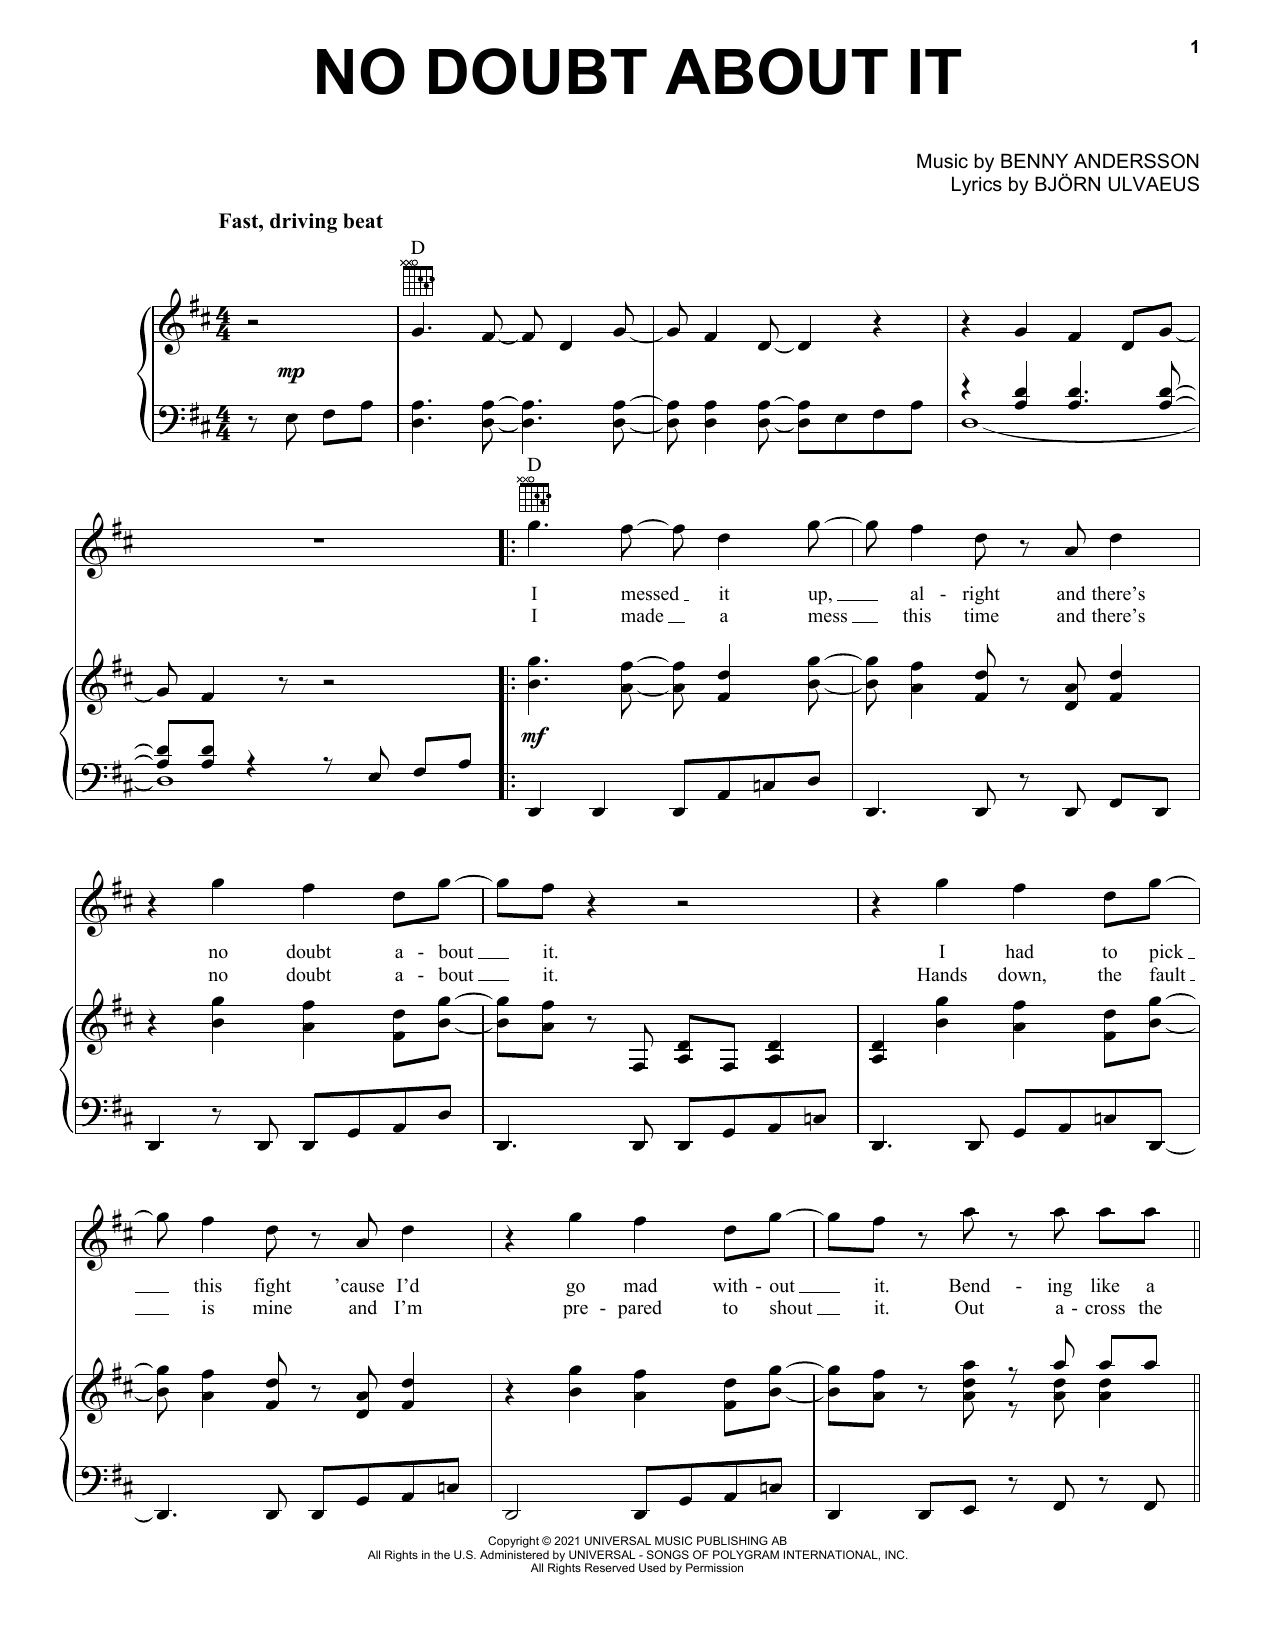 Download ABBA No Doubt About It Sheet Music